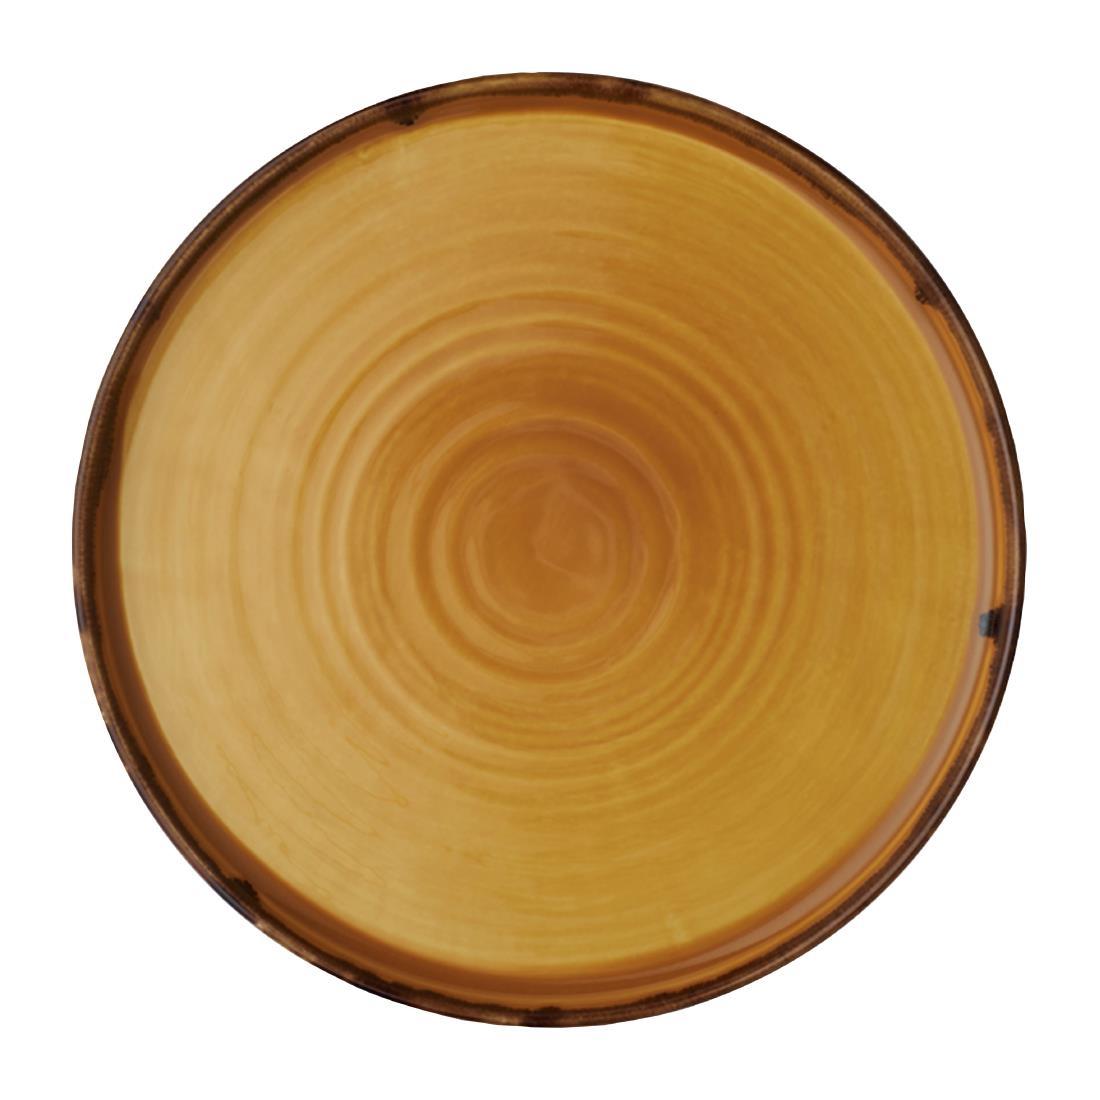 Dudson Harvest Walled Plates Mustard 260mm (Pack of 6) - FX155  - 1